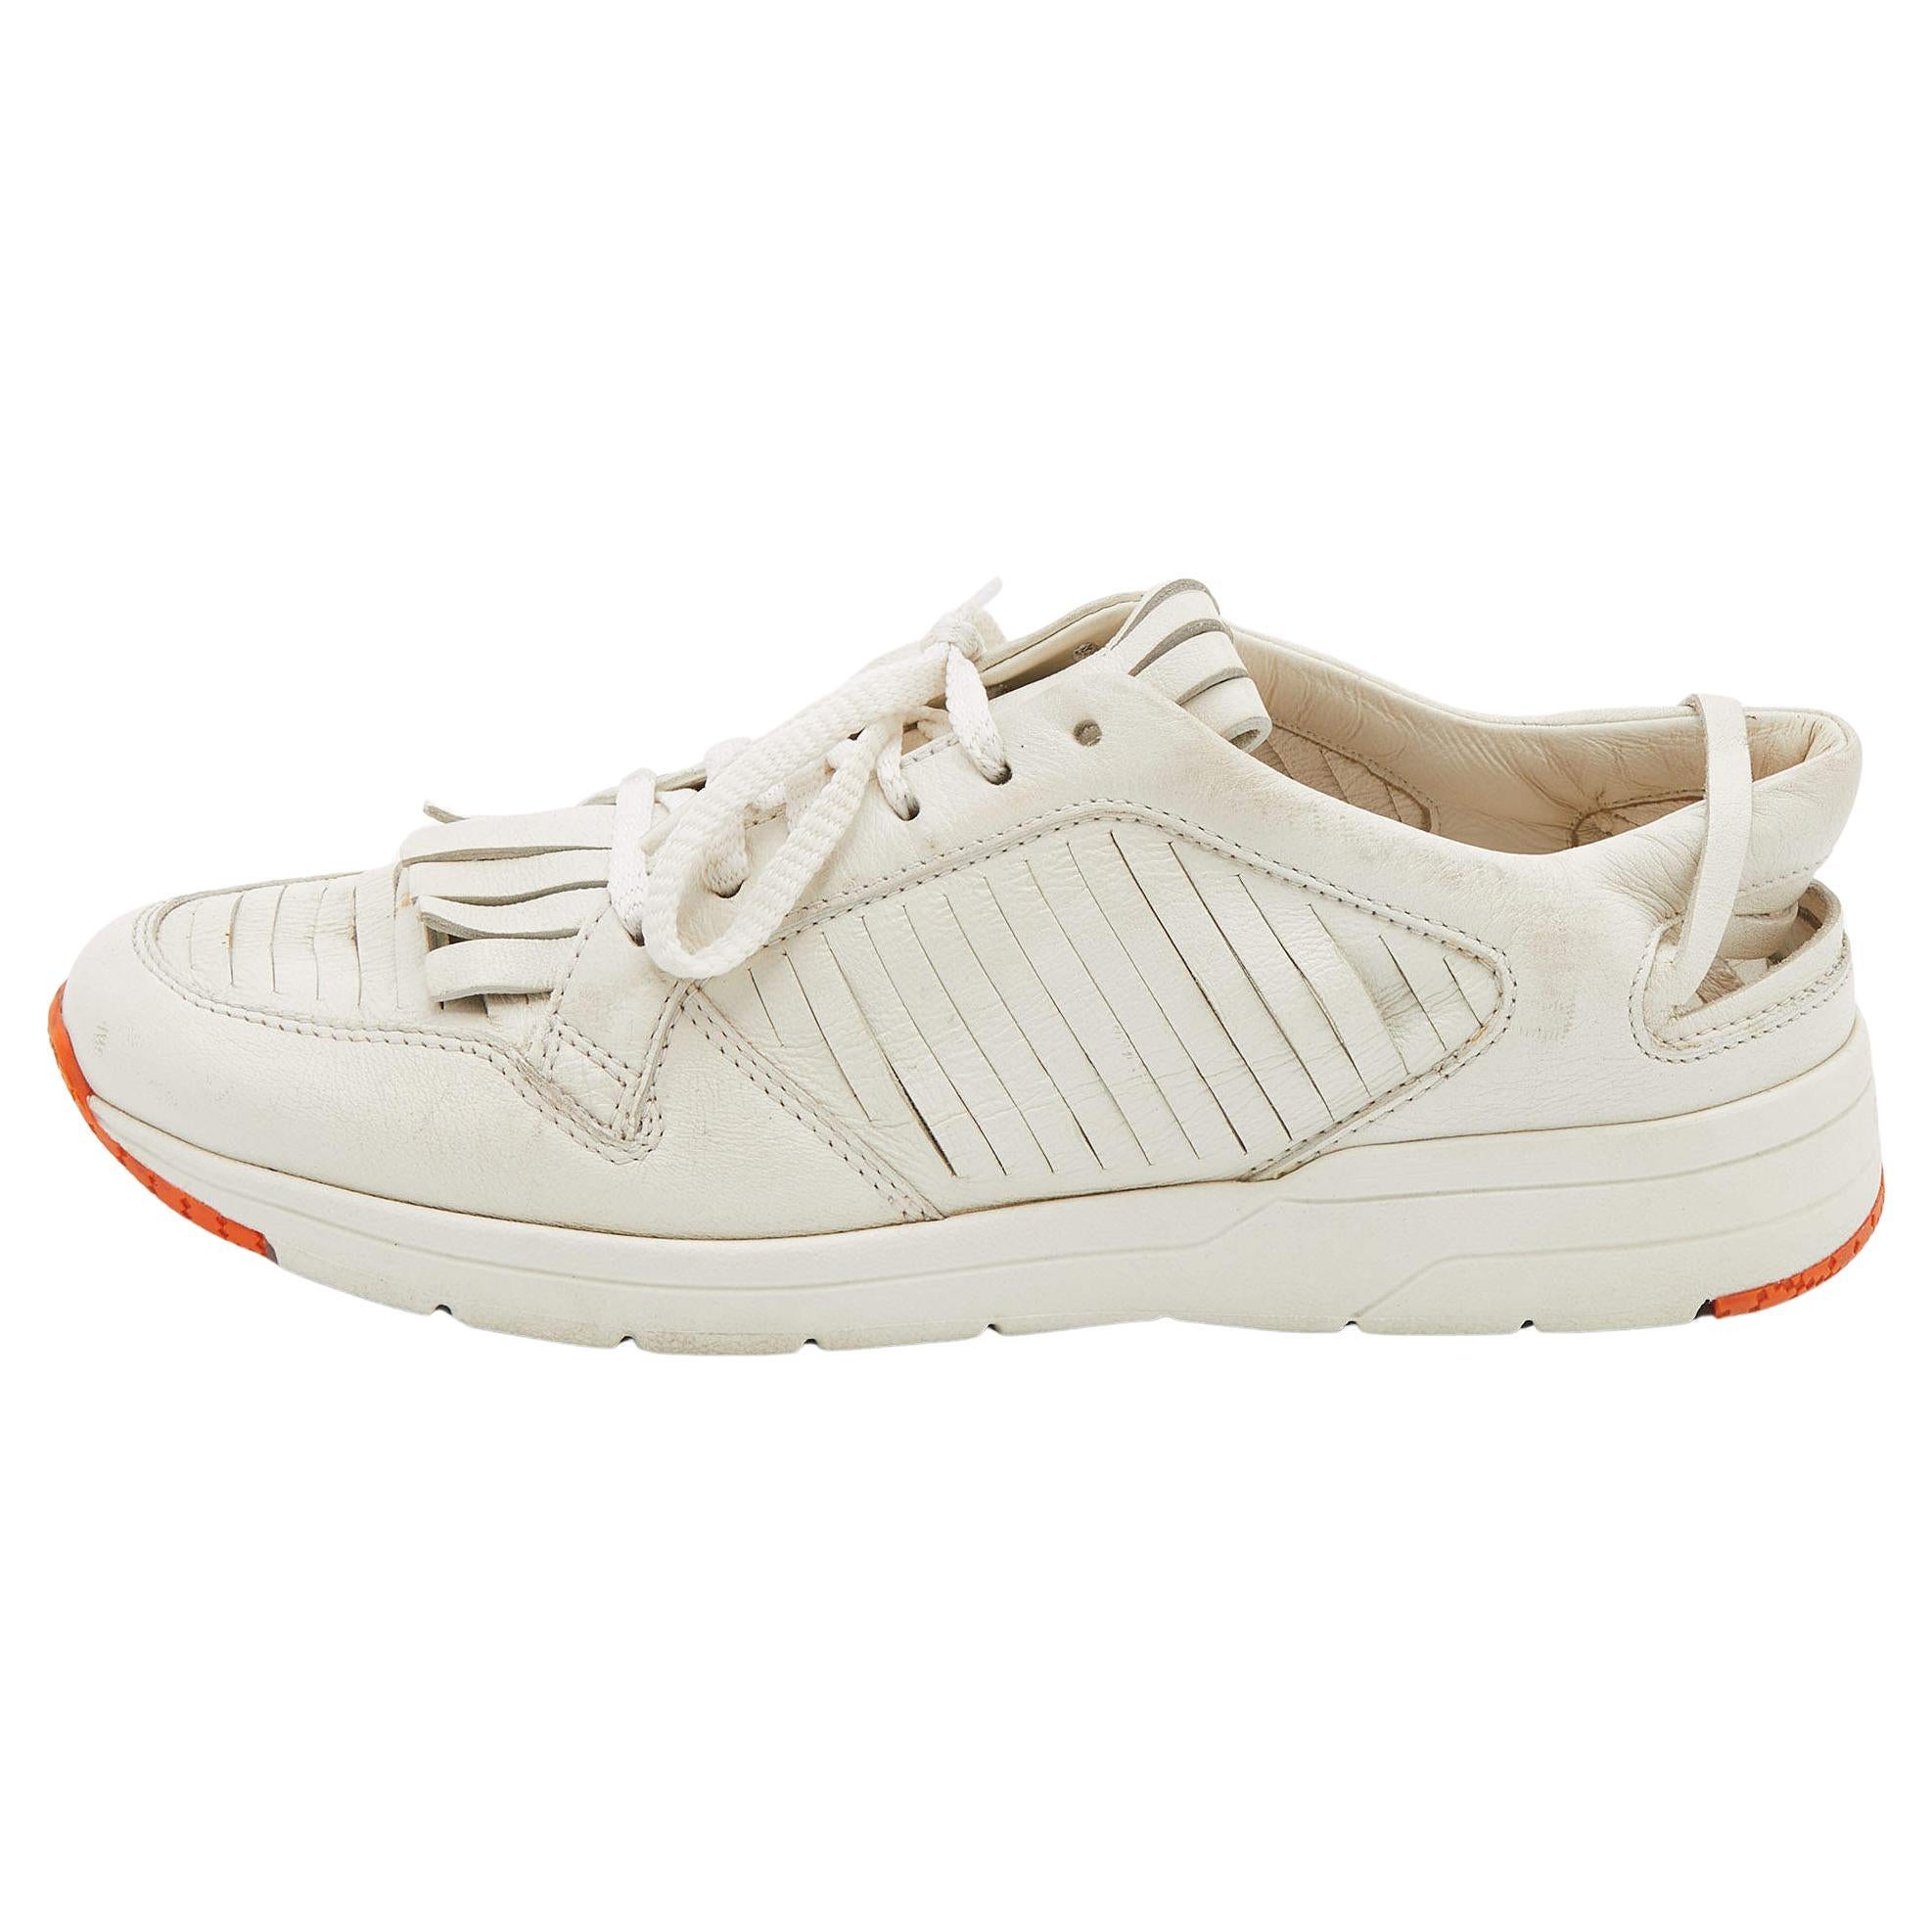 Gucci White Leather Tassel Low Top Sneakers Size 36.5 For Sale